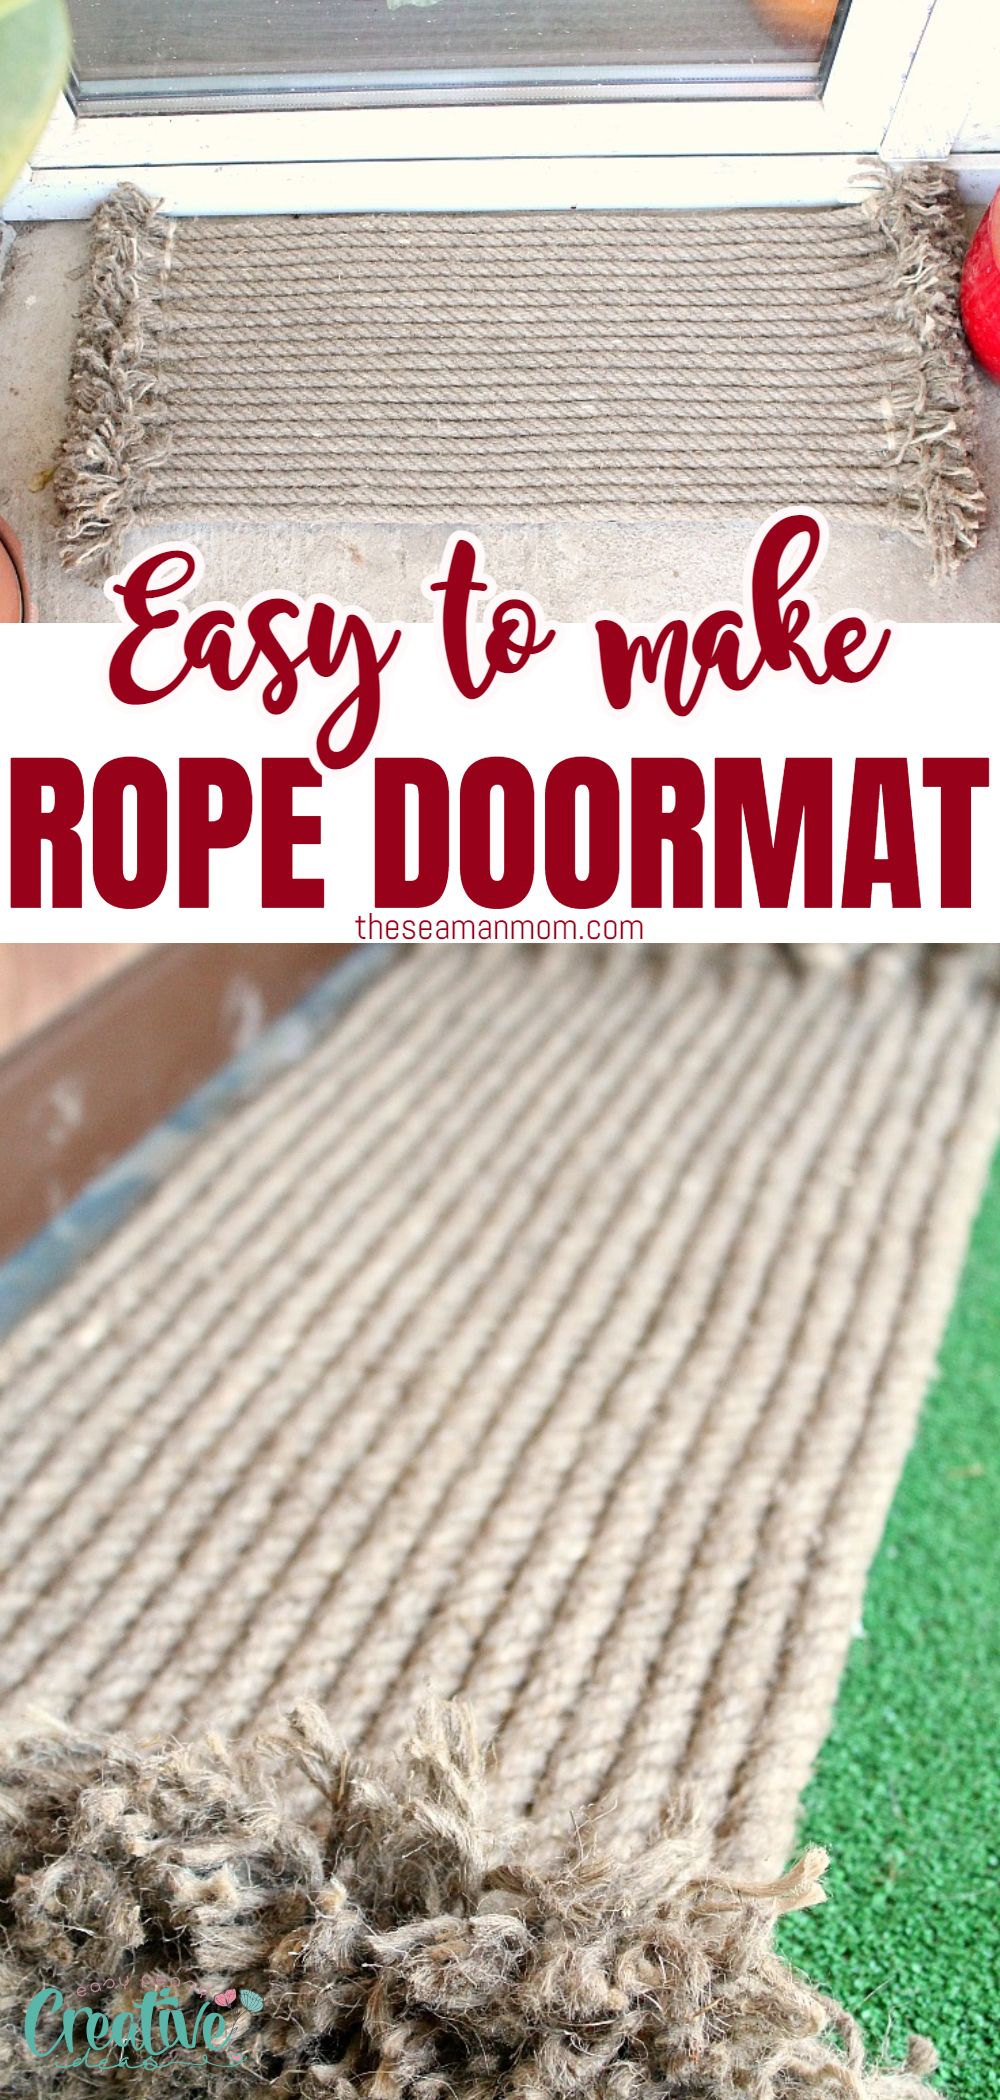 Dress up your entry way with a pretty, durable and affordable DIY rope rug! So easy to make and a great way to add some rustic touch to your entryway! If you're looking to add some comfort under your feet when you get back from a long day at work, come home with tired feet or before going out for groceries or anything outdoors this spring/summer season, why not make yourself a gorgeous rope doormat? via @petroneagu